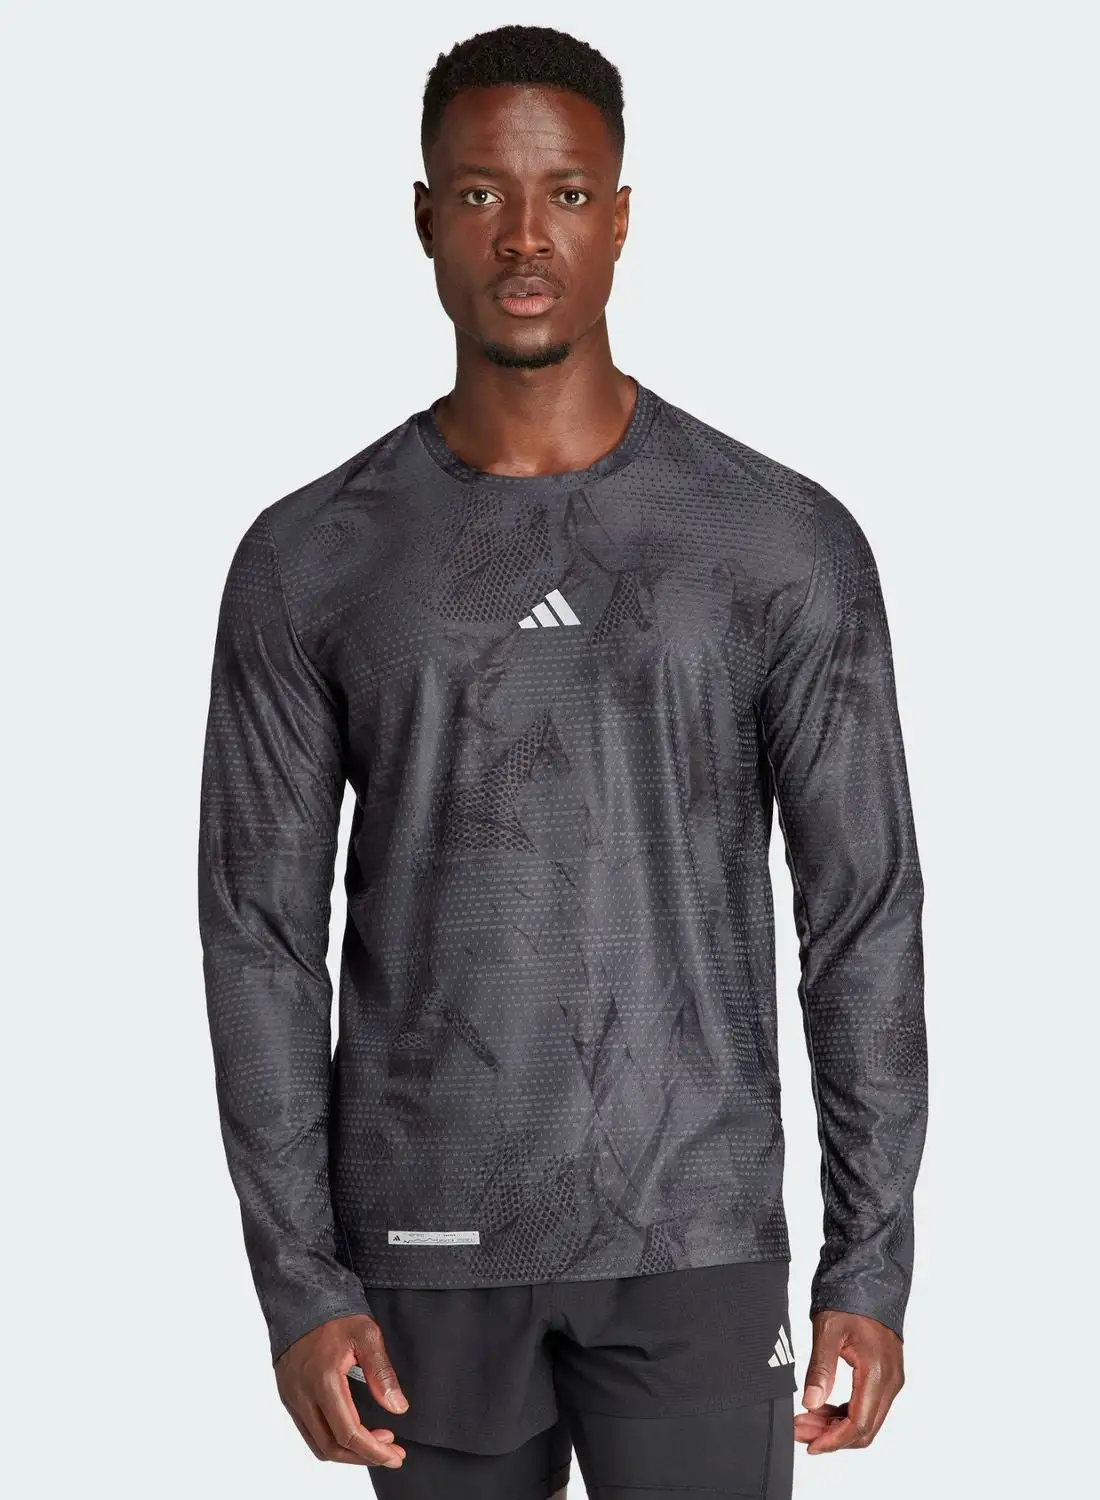 Adidas Ultimate All Over Printed T-Shirt